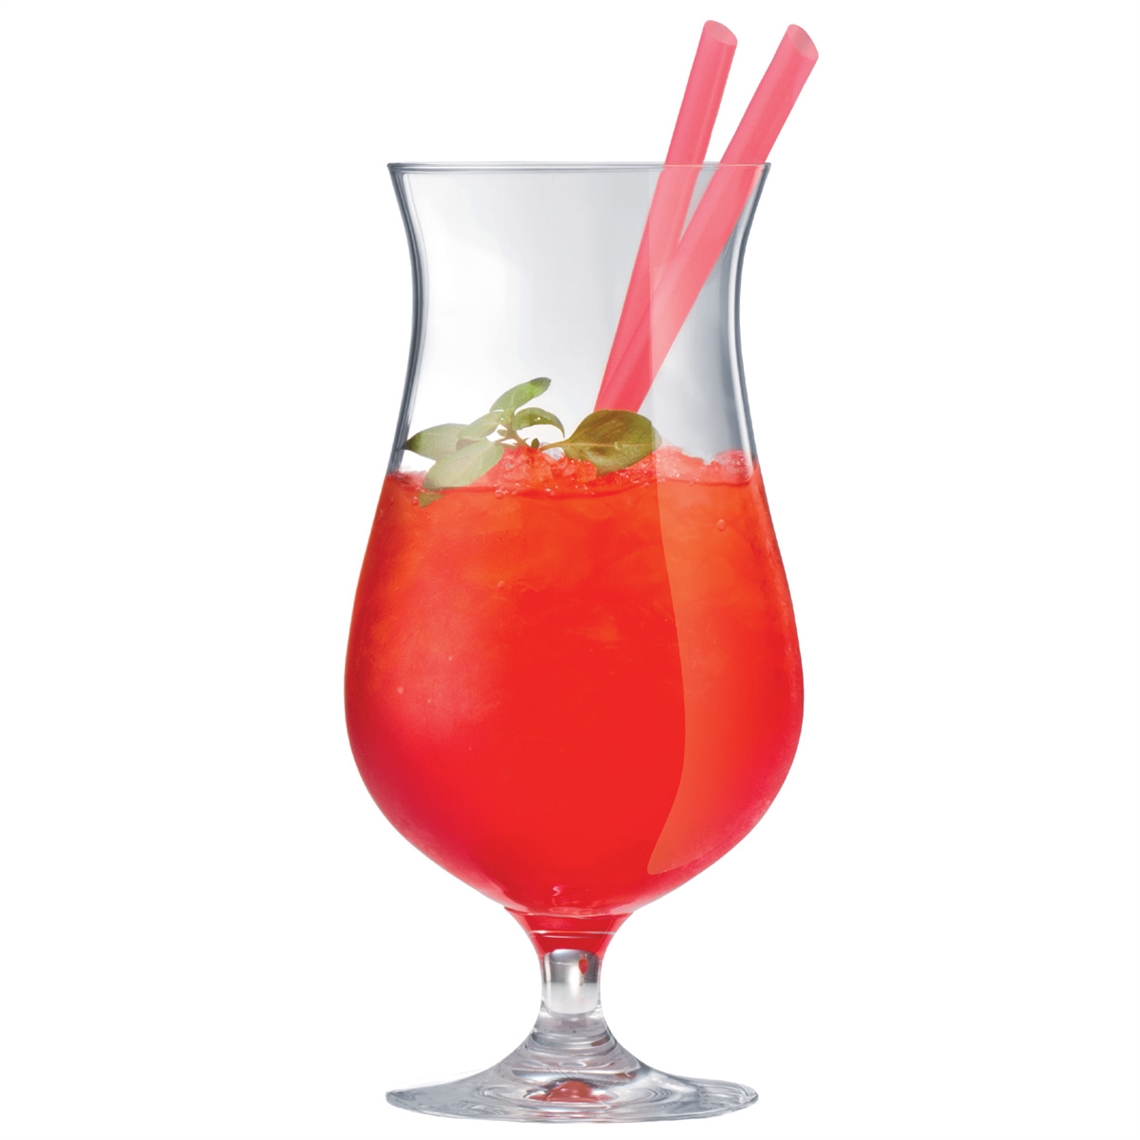 View more restaurant glasses - mark thomas from our Cocktail Glasses range